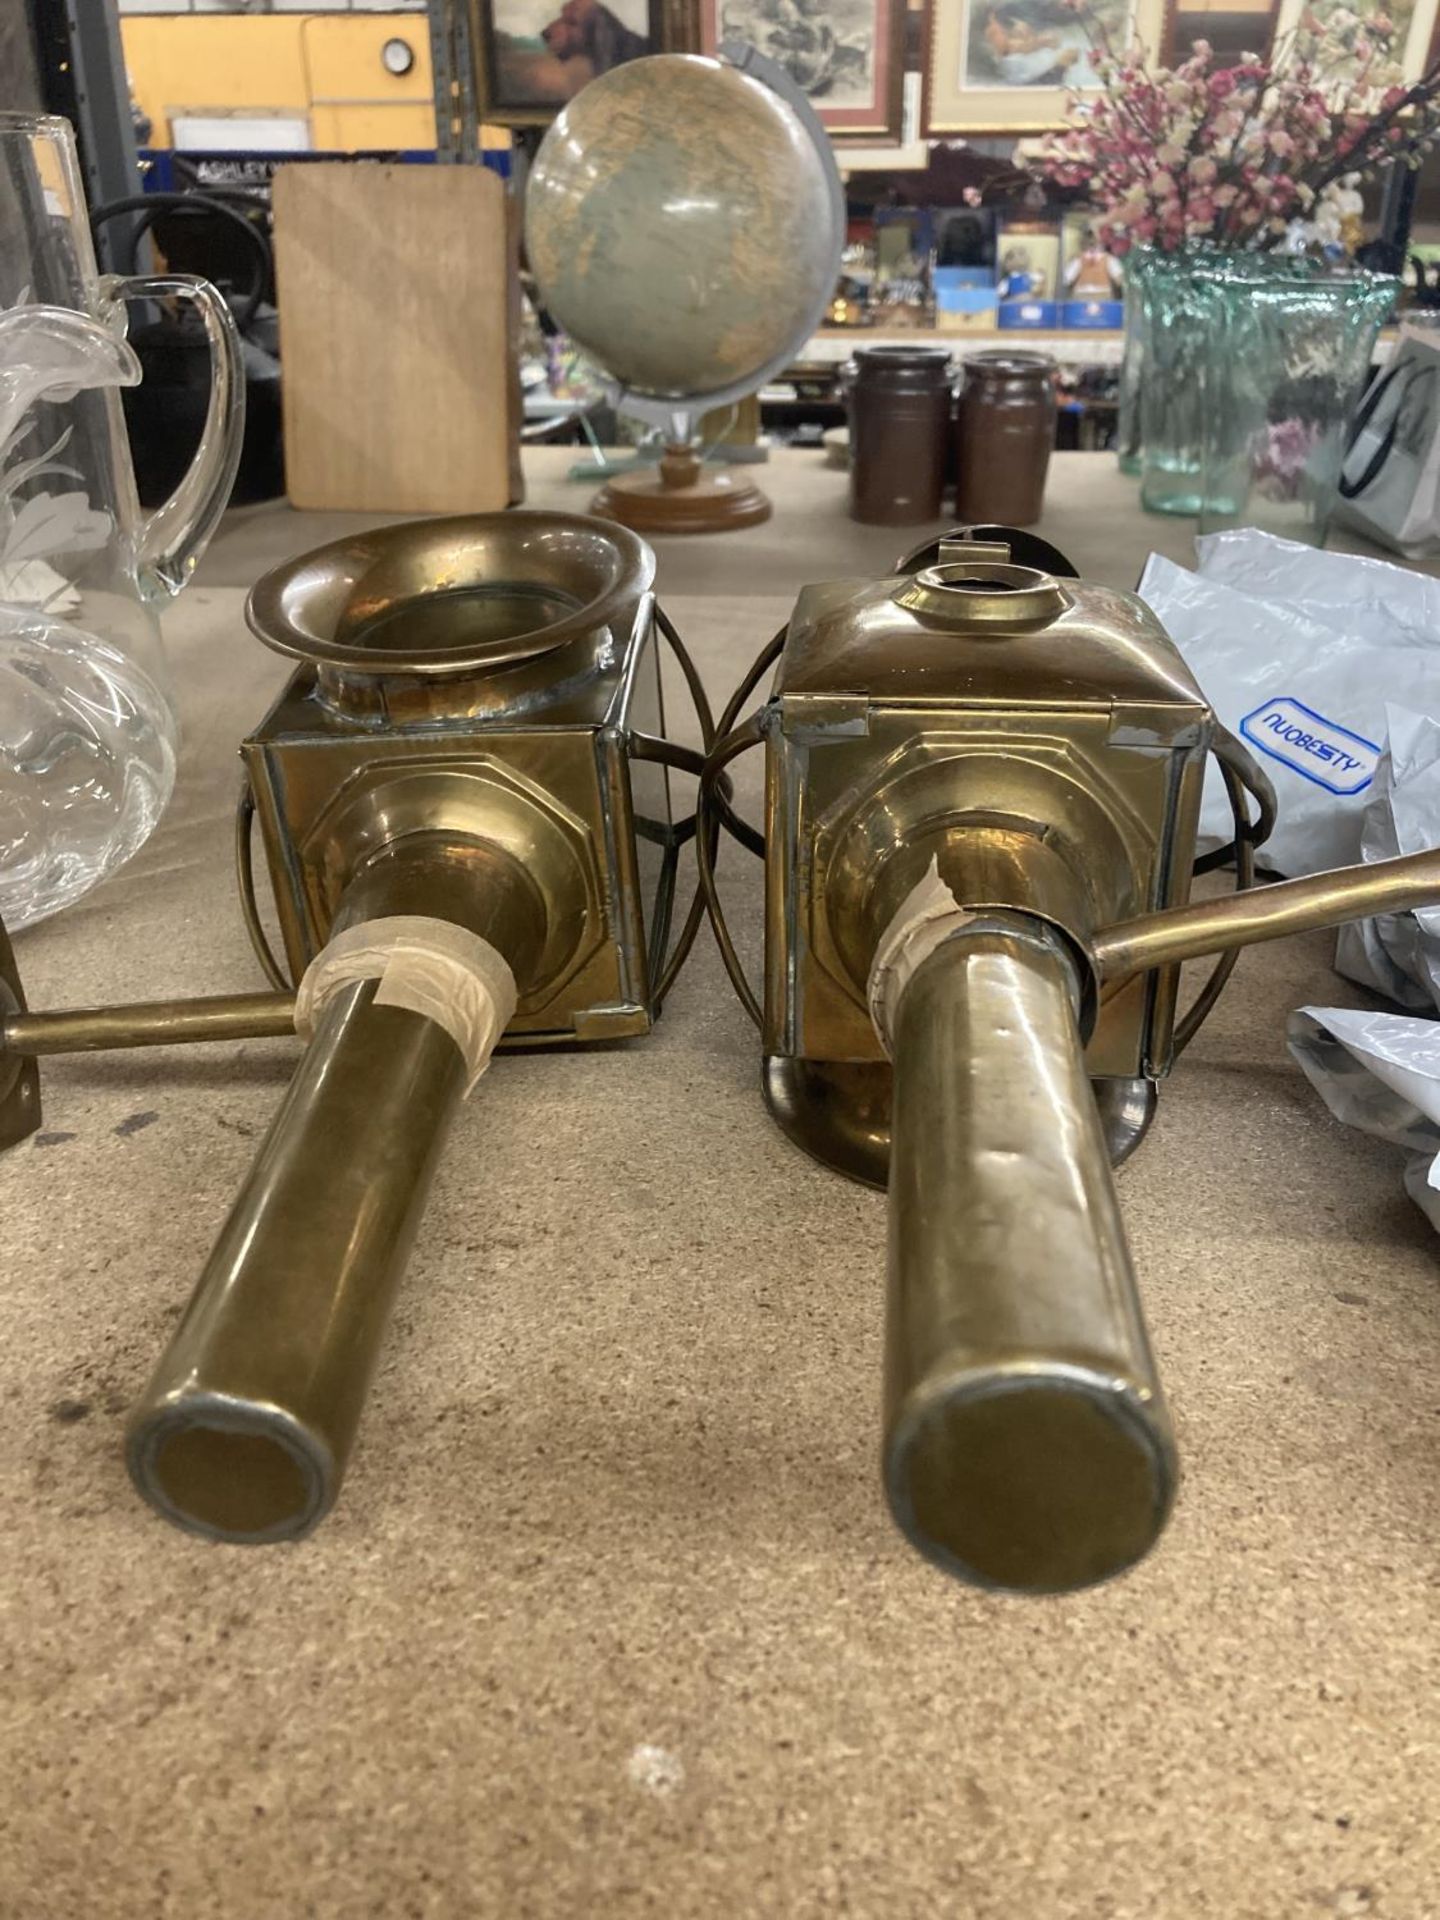 A PAIR OF VINTAGE BRASS COACHING LAMPS - Image 4 of 4